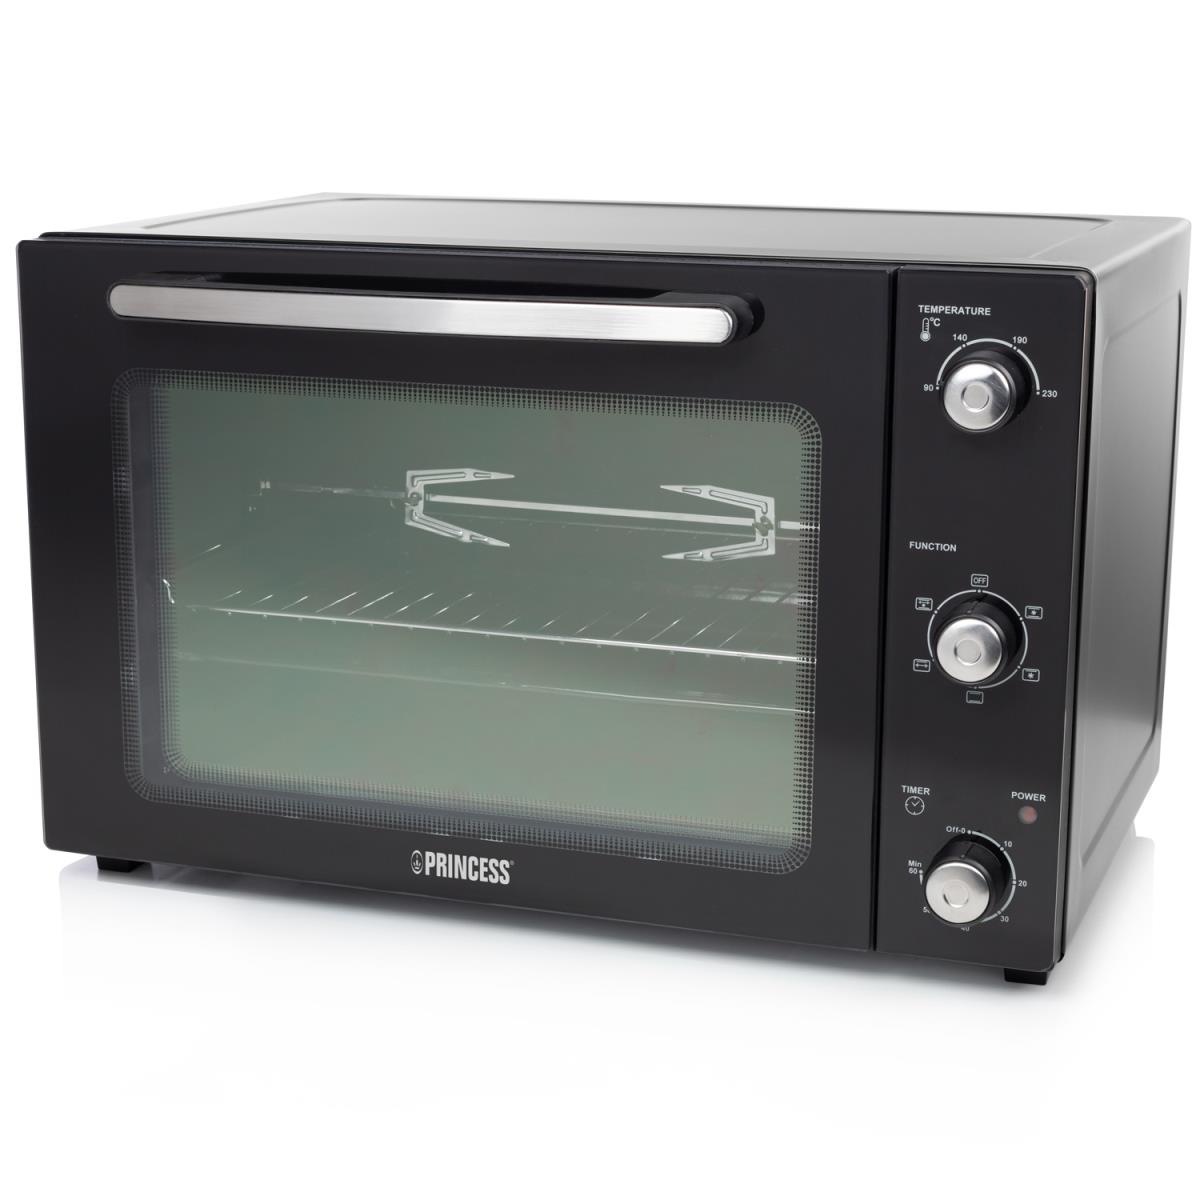 Princess: Bänkugn Convection Oven DeLuxe 112761